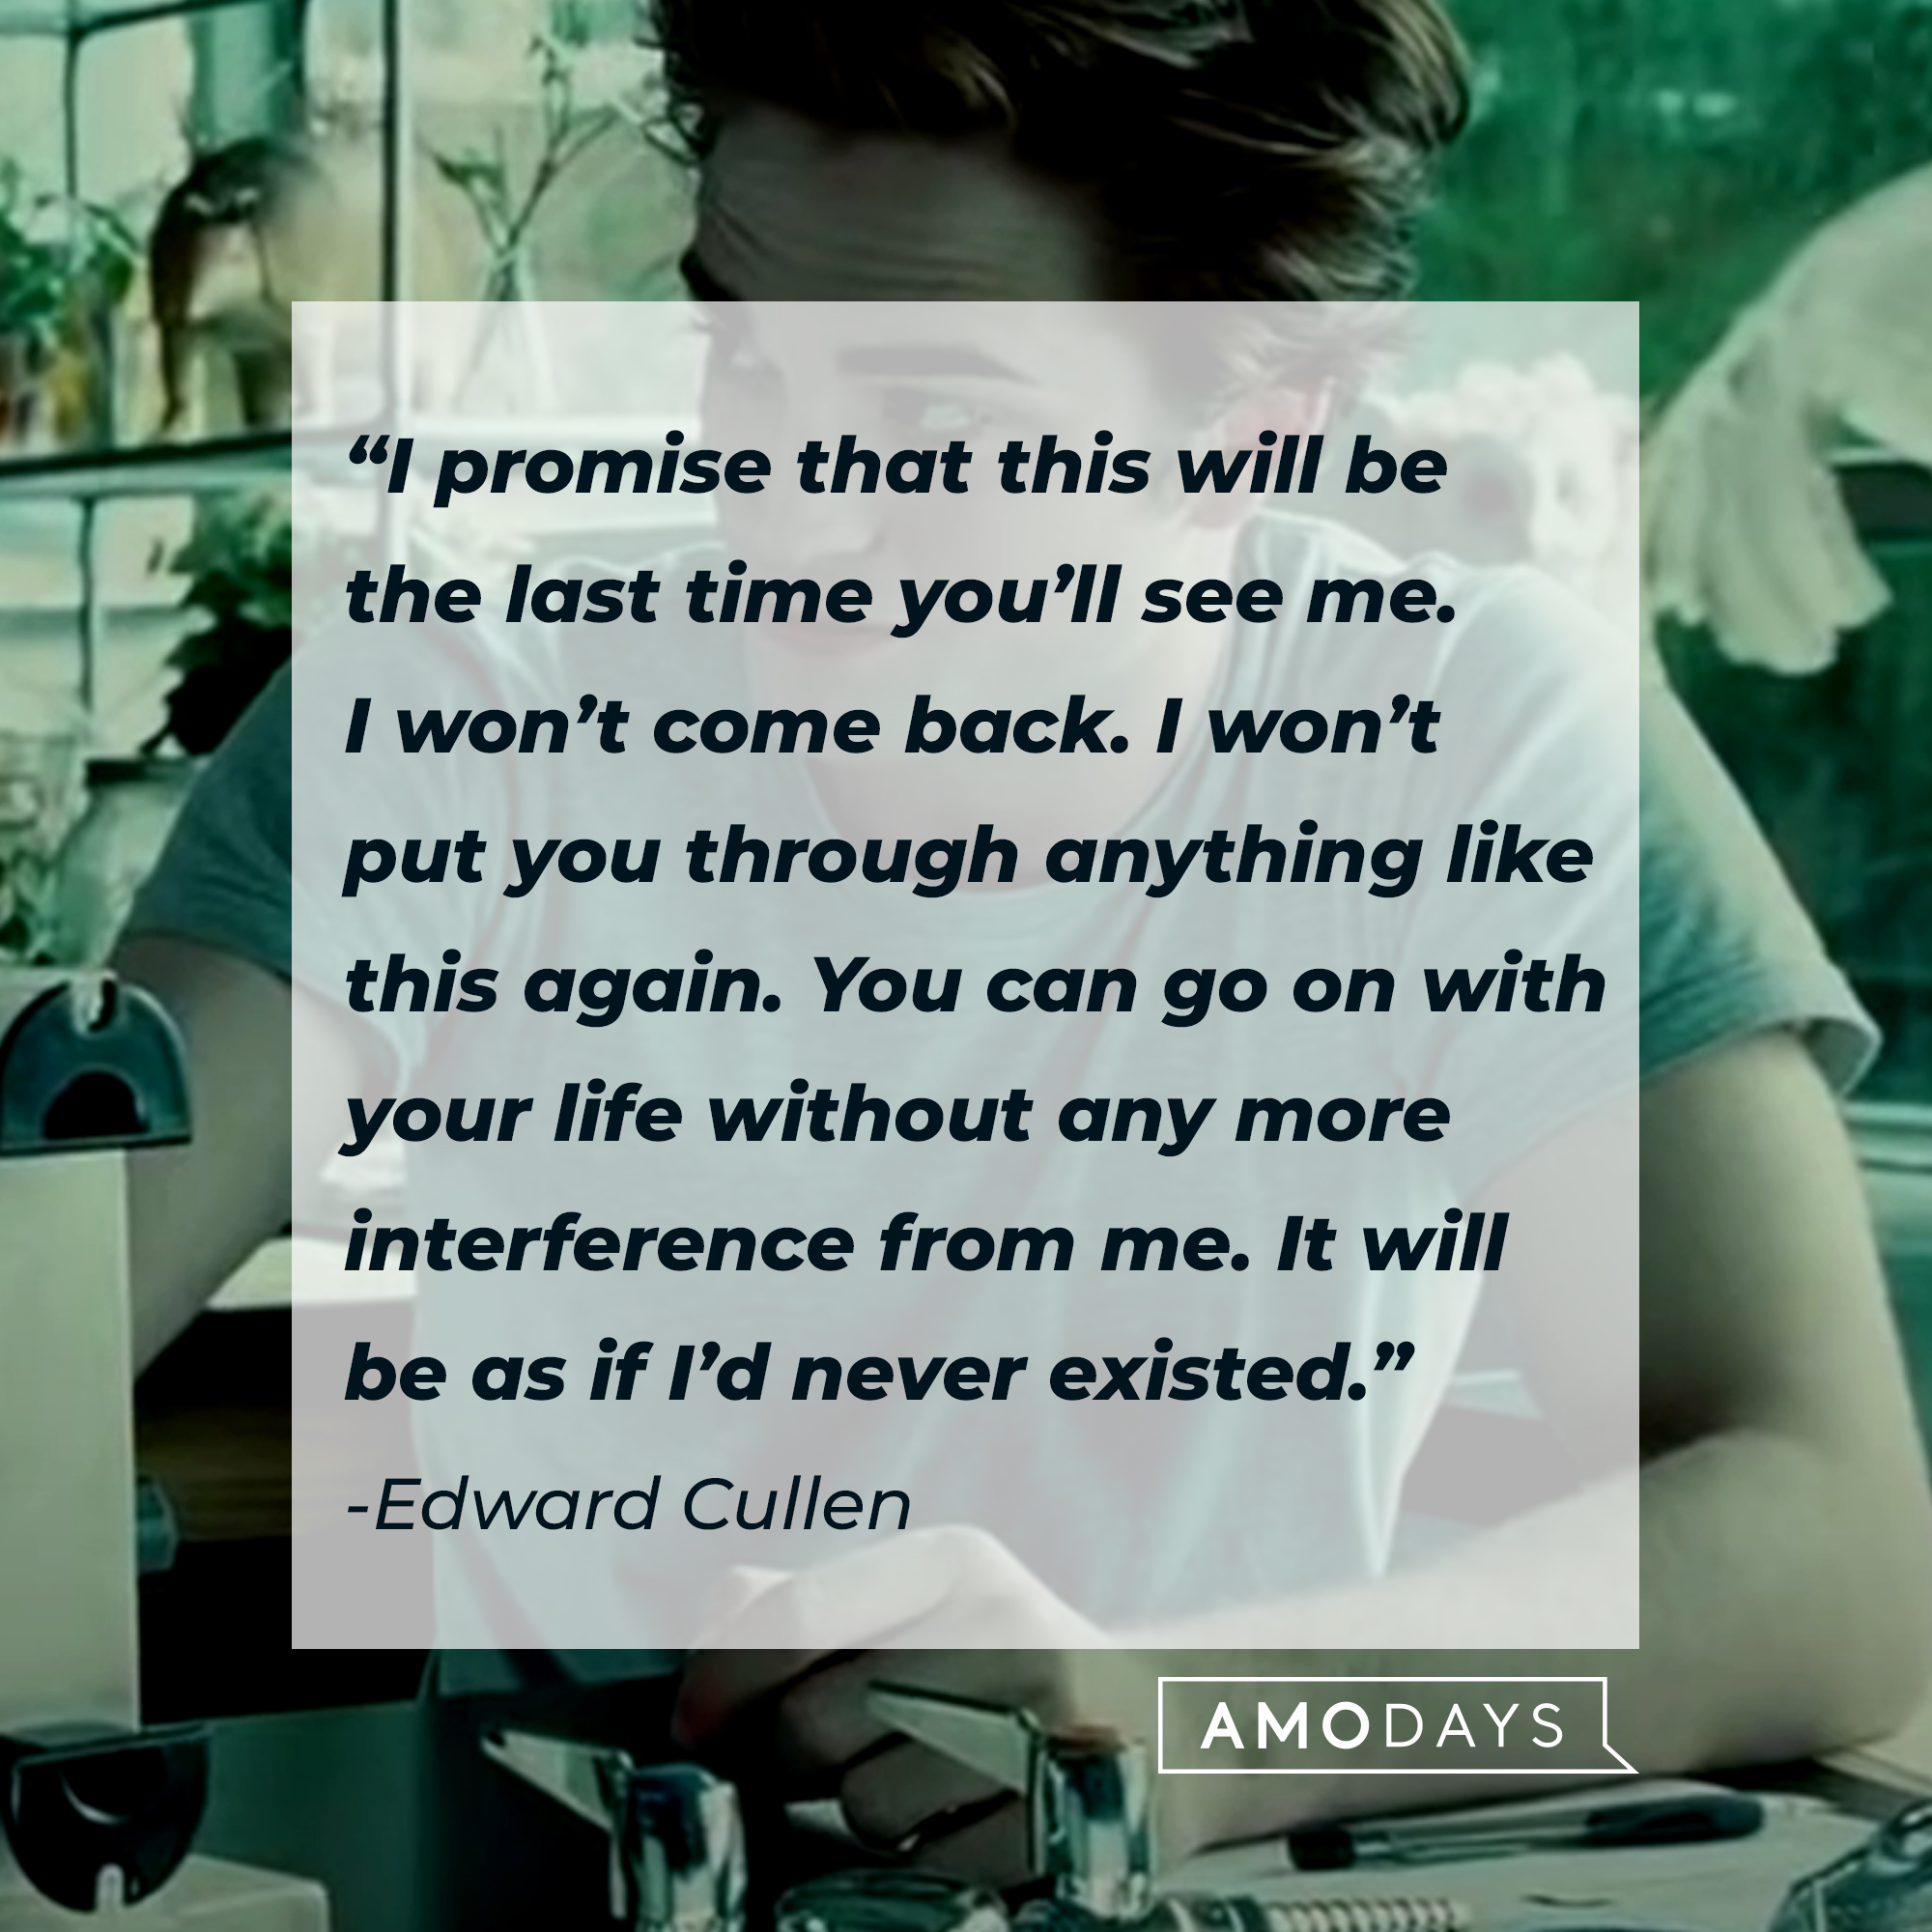 Edward Cullen's quote: “I promise that this will be the last time you’ll see me. I won’t come back. I won’t put you through anything like this again. You can go on with your life without any more interference from me. It will be as if I’d never existed.” | Source: facebook.com/twilight